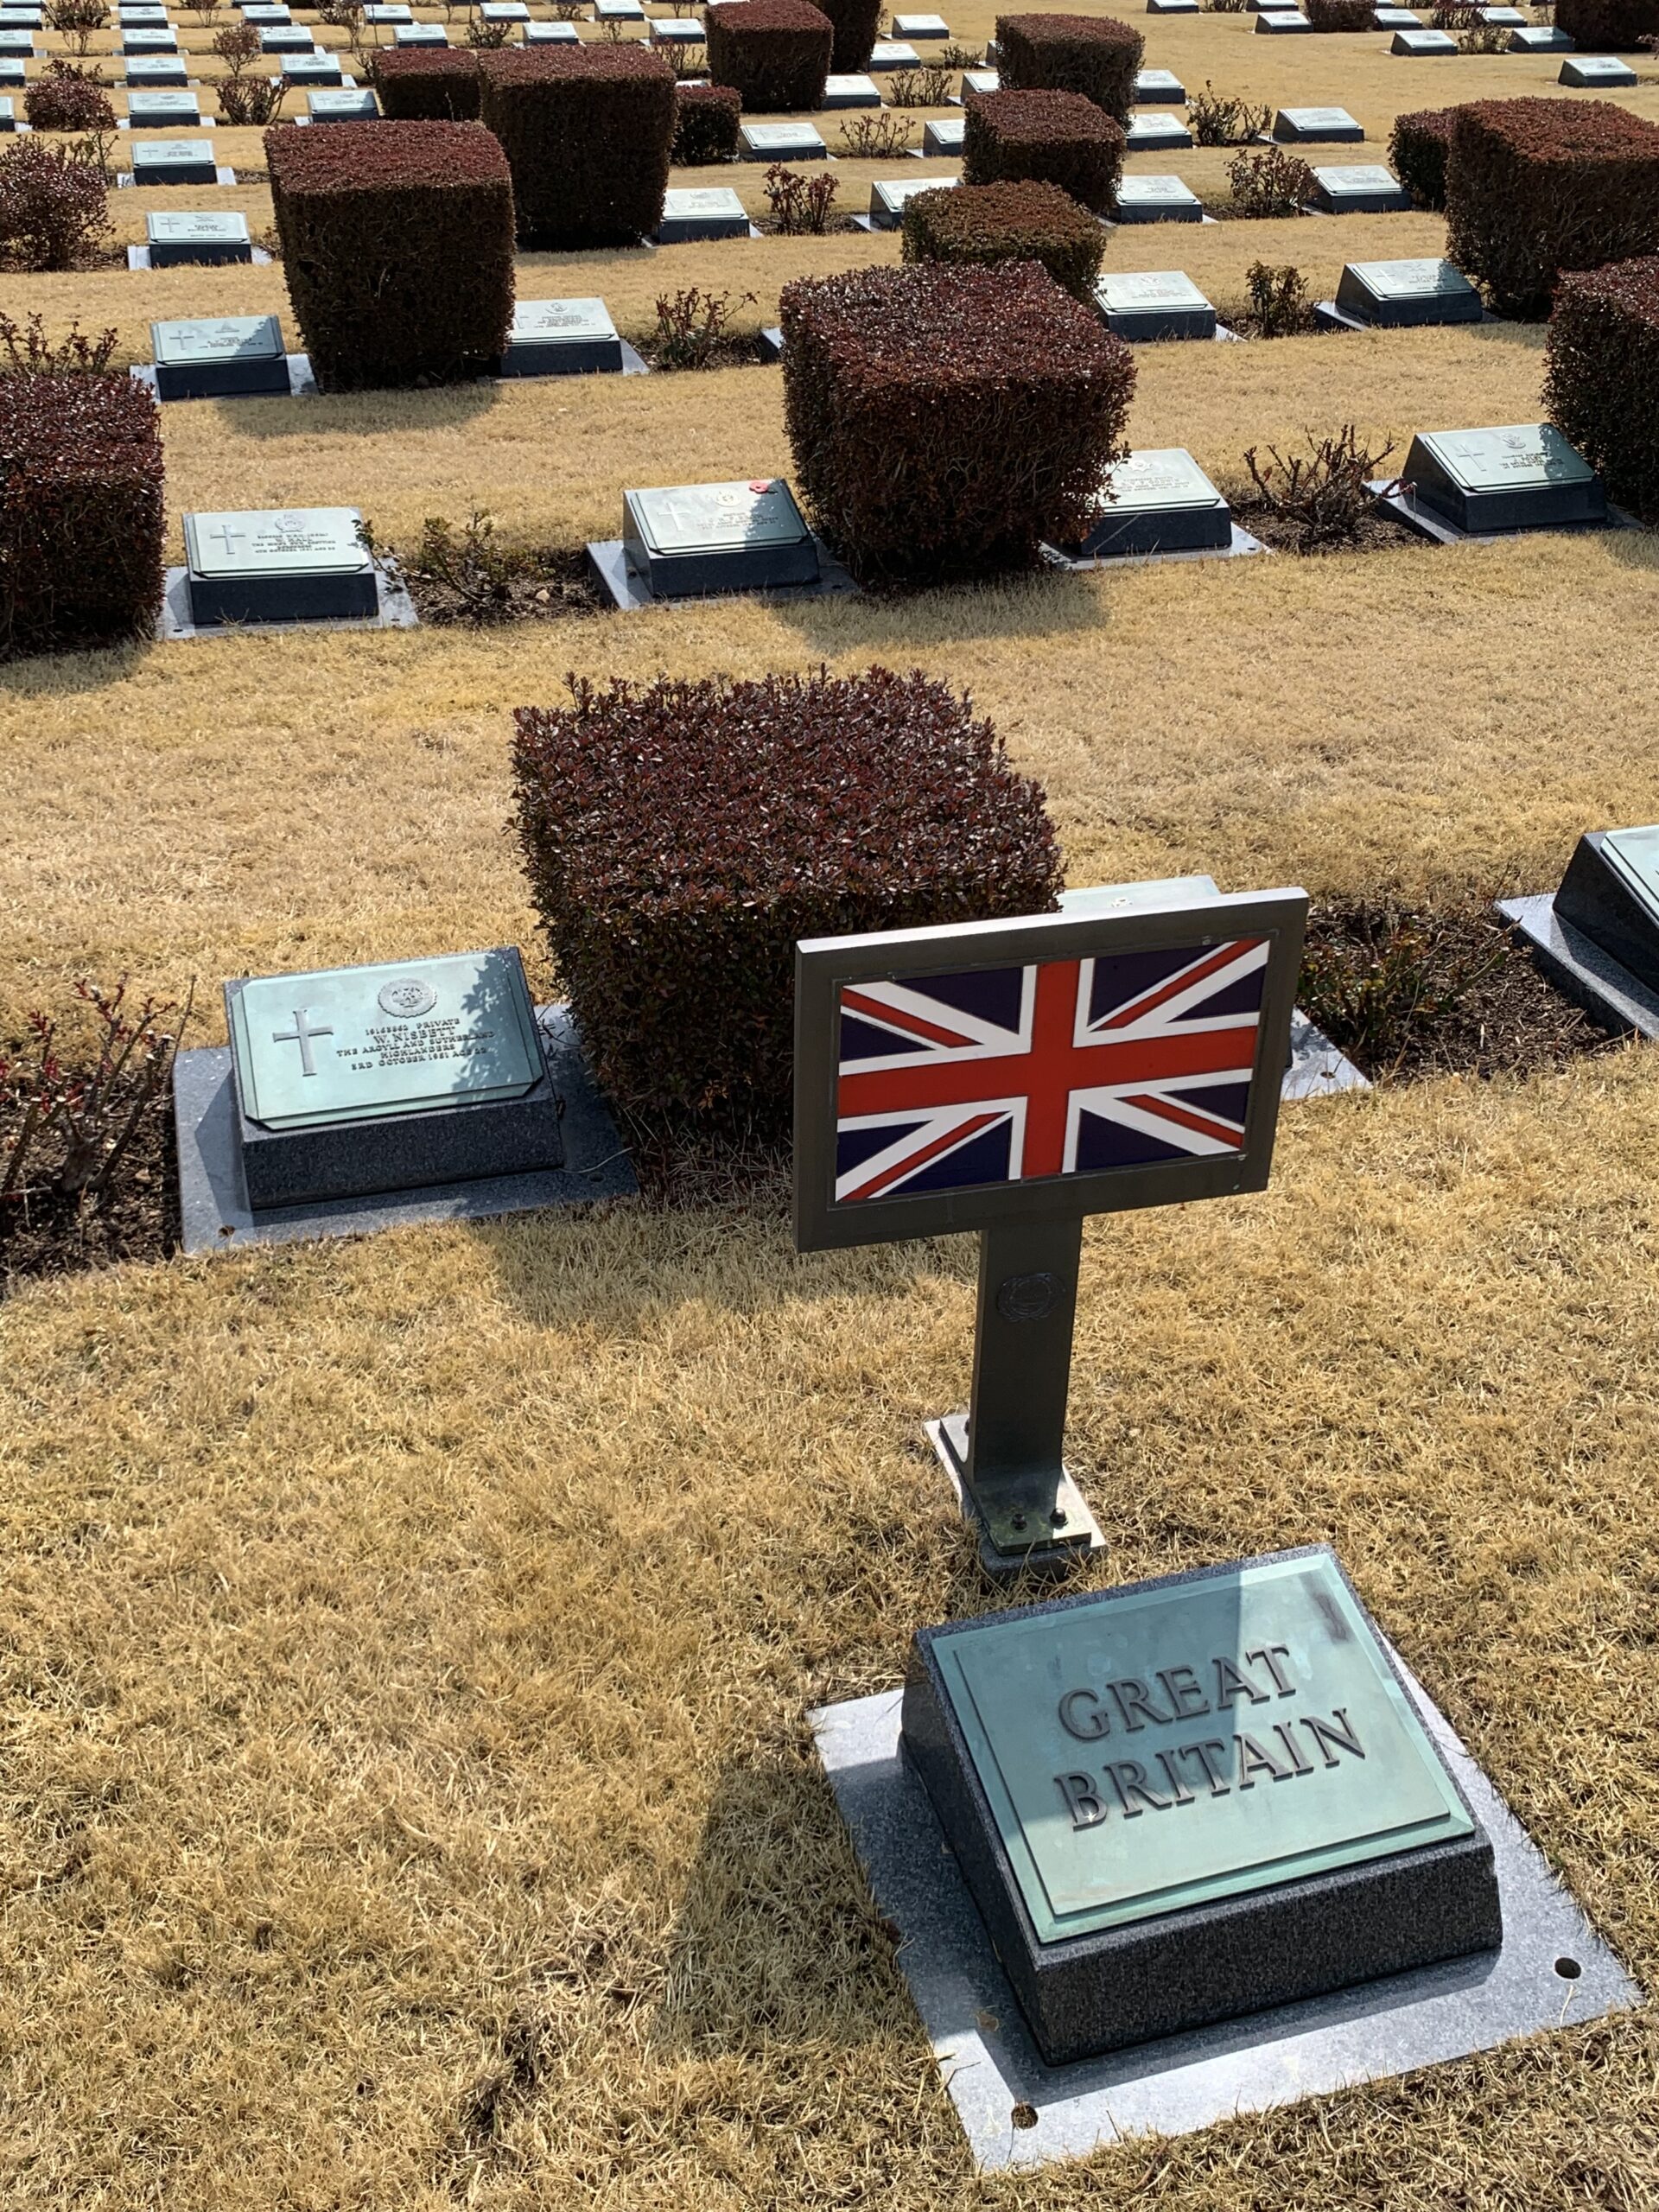 British section of the UN Cemetery in Busan